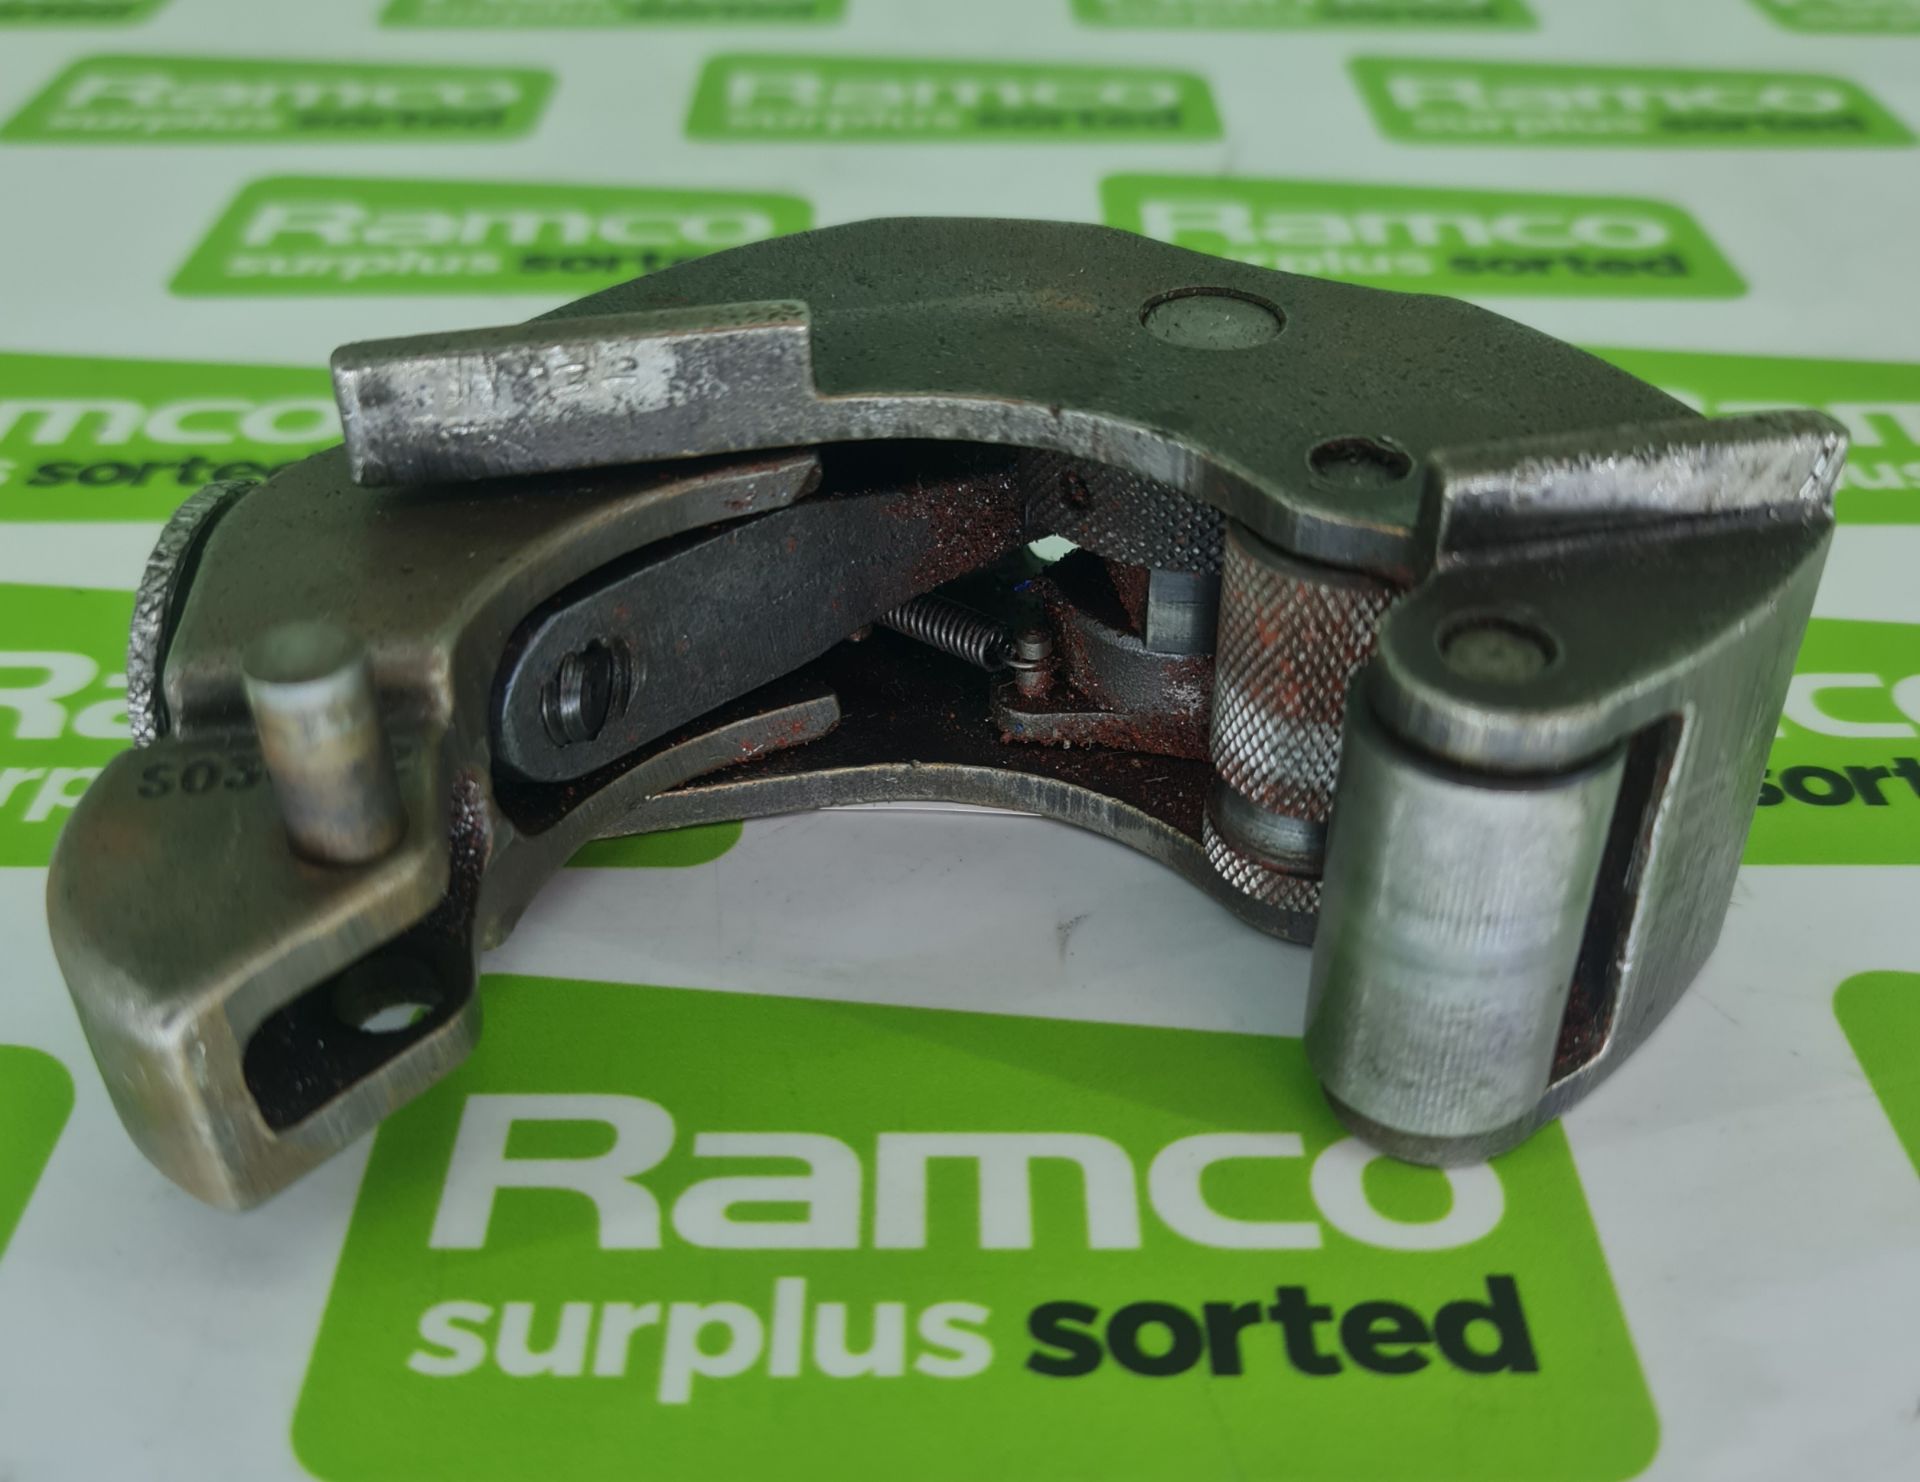 Rotostock S030132 pipe cutter - Image 3 of 3